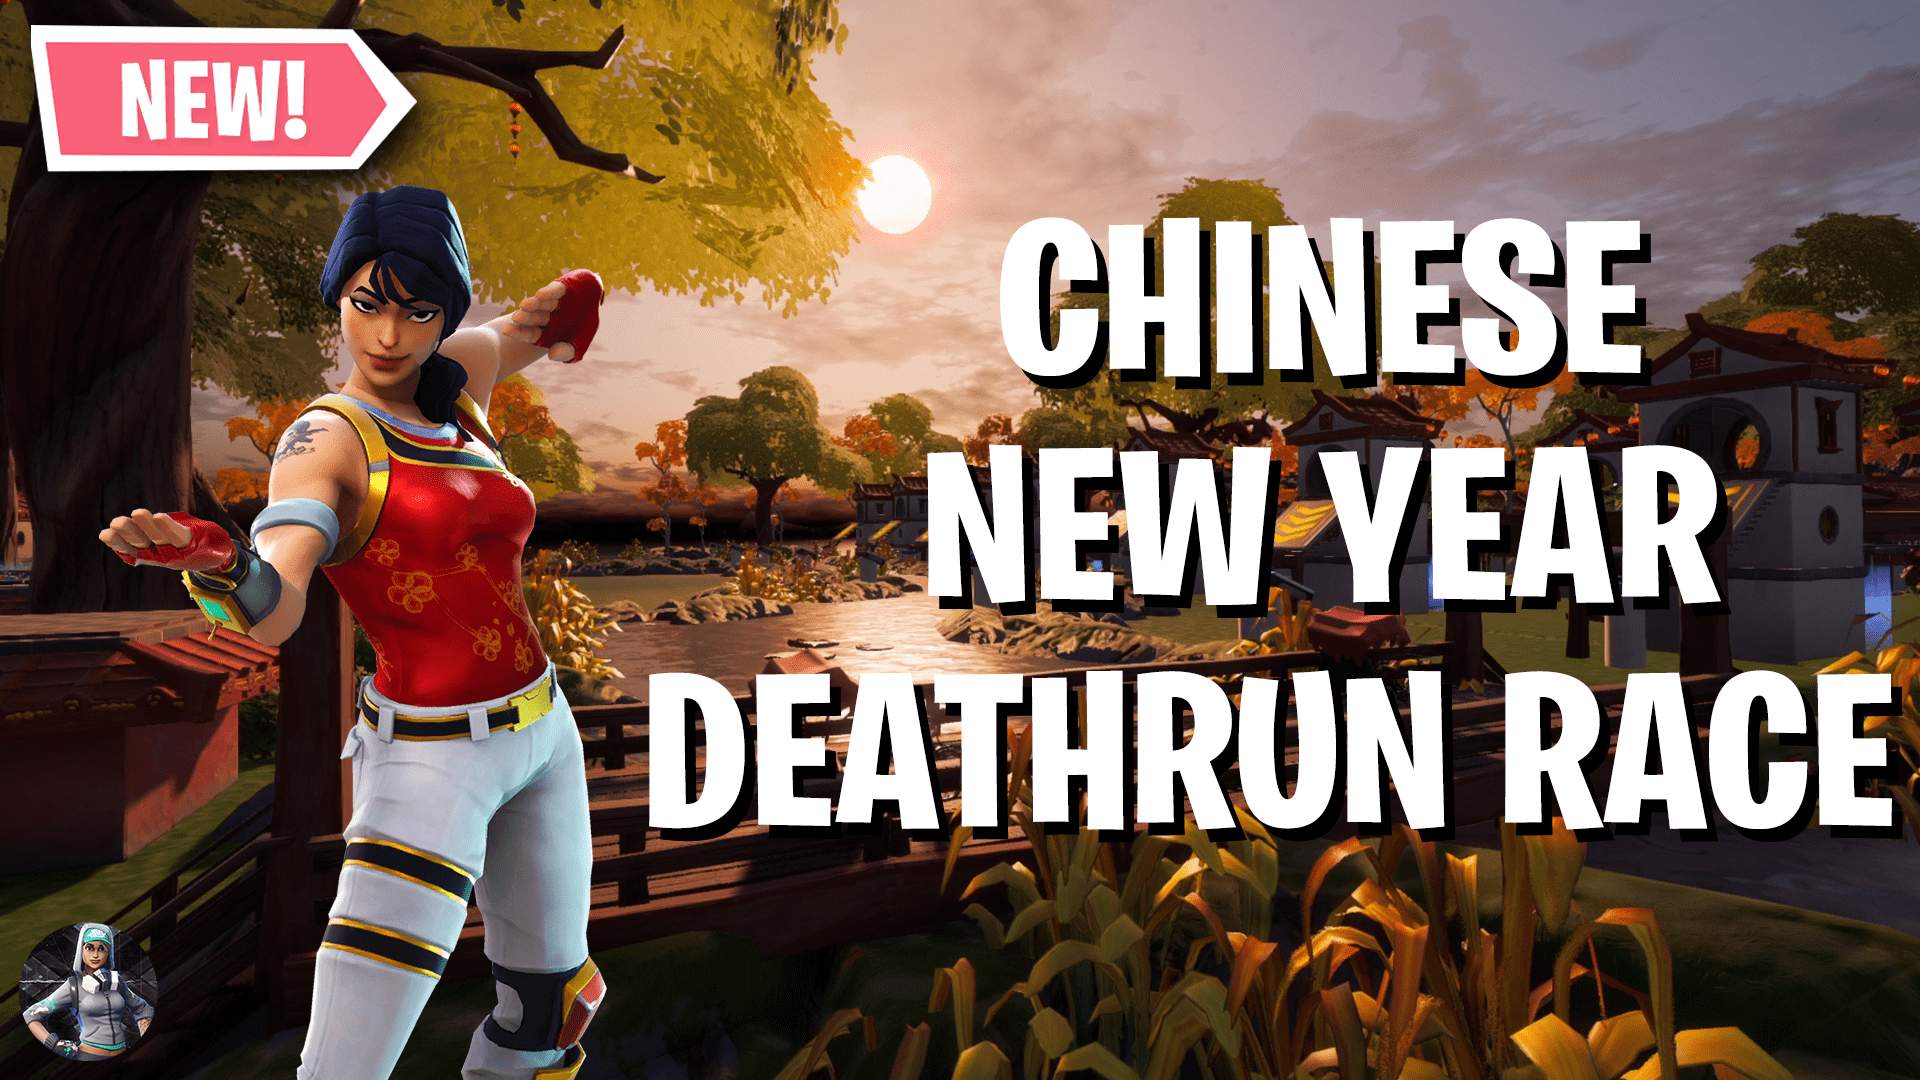 CHINESE NEW YEAR DEATHRUN RACE